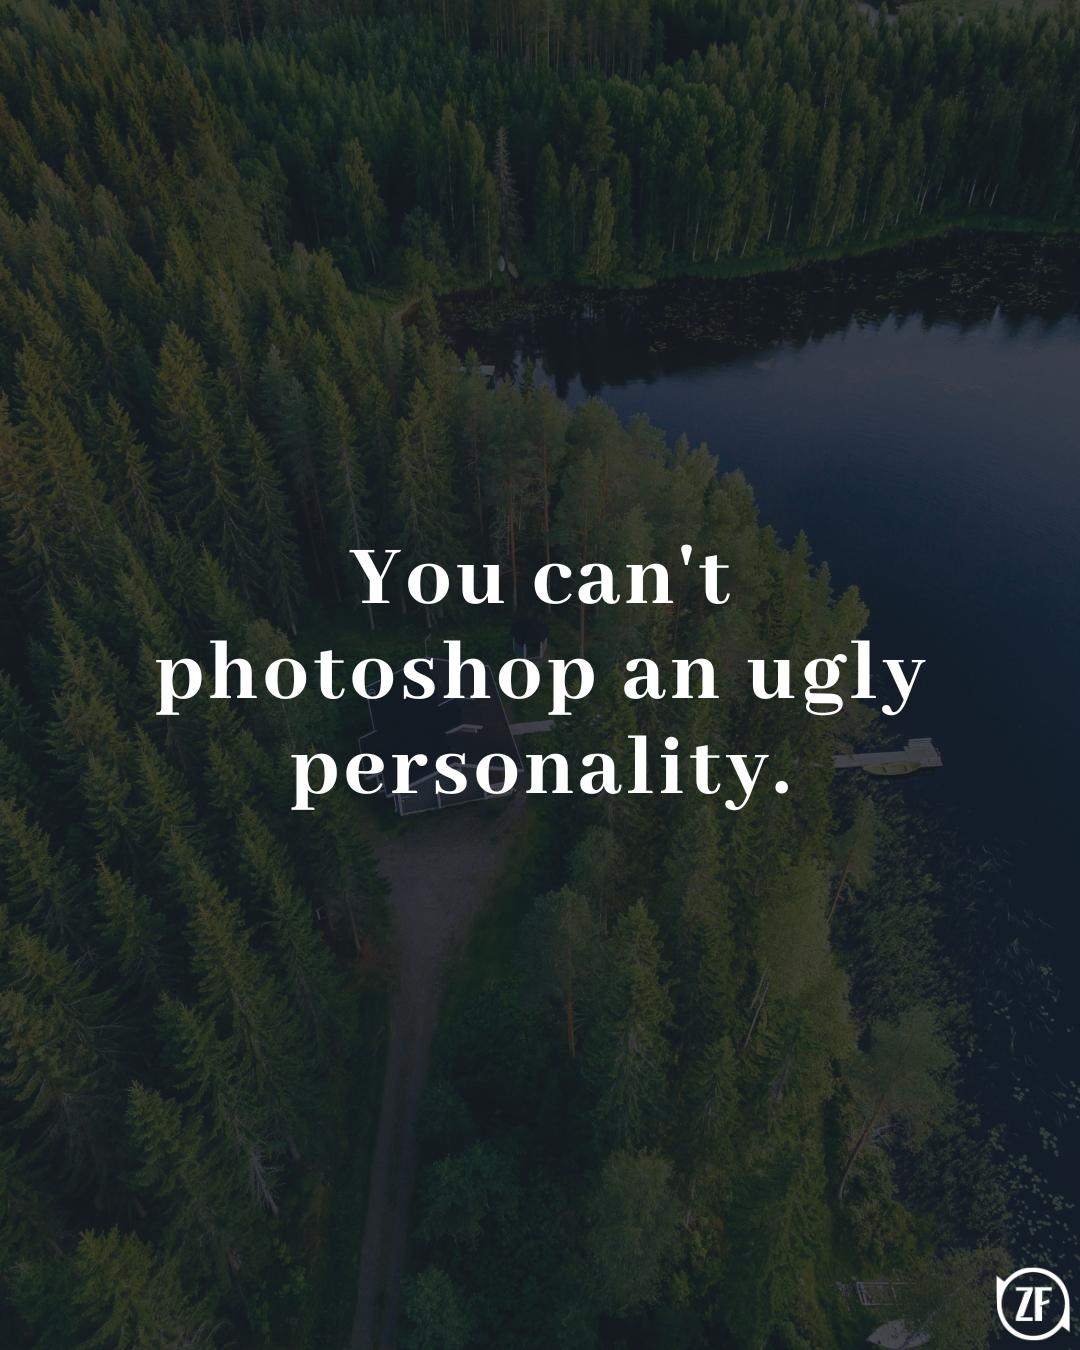 You can't photoshop an ugly personality.